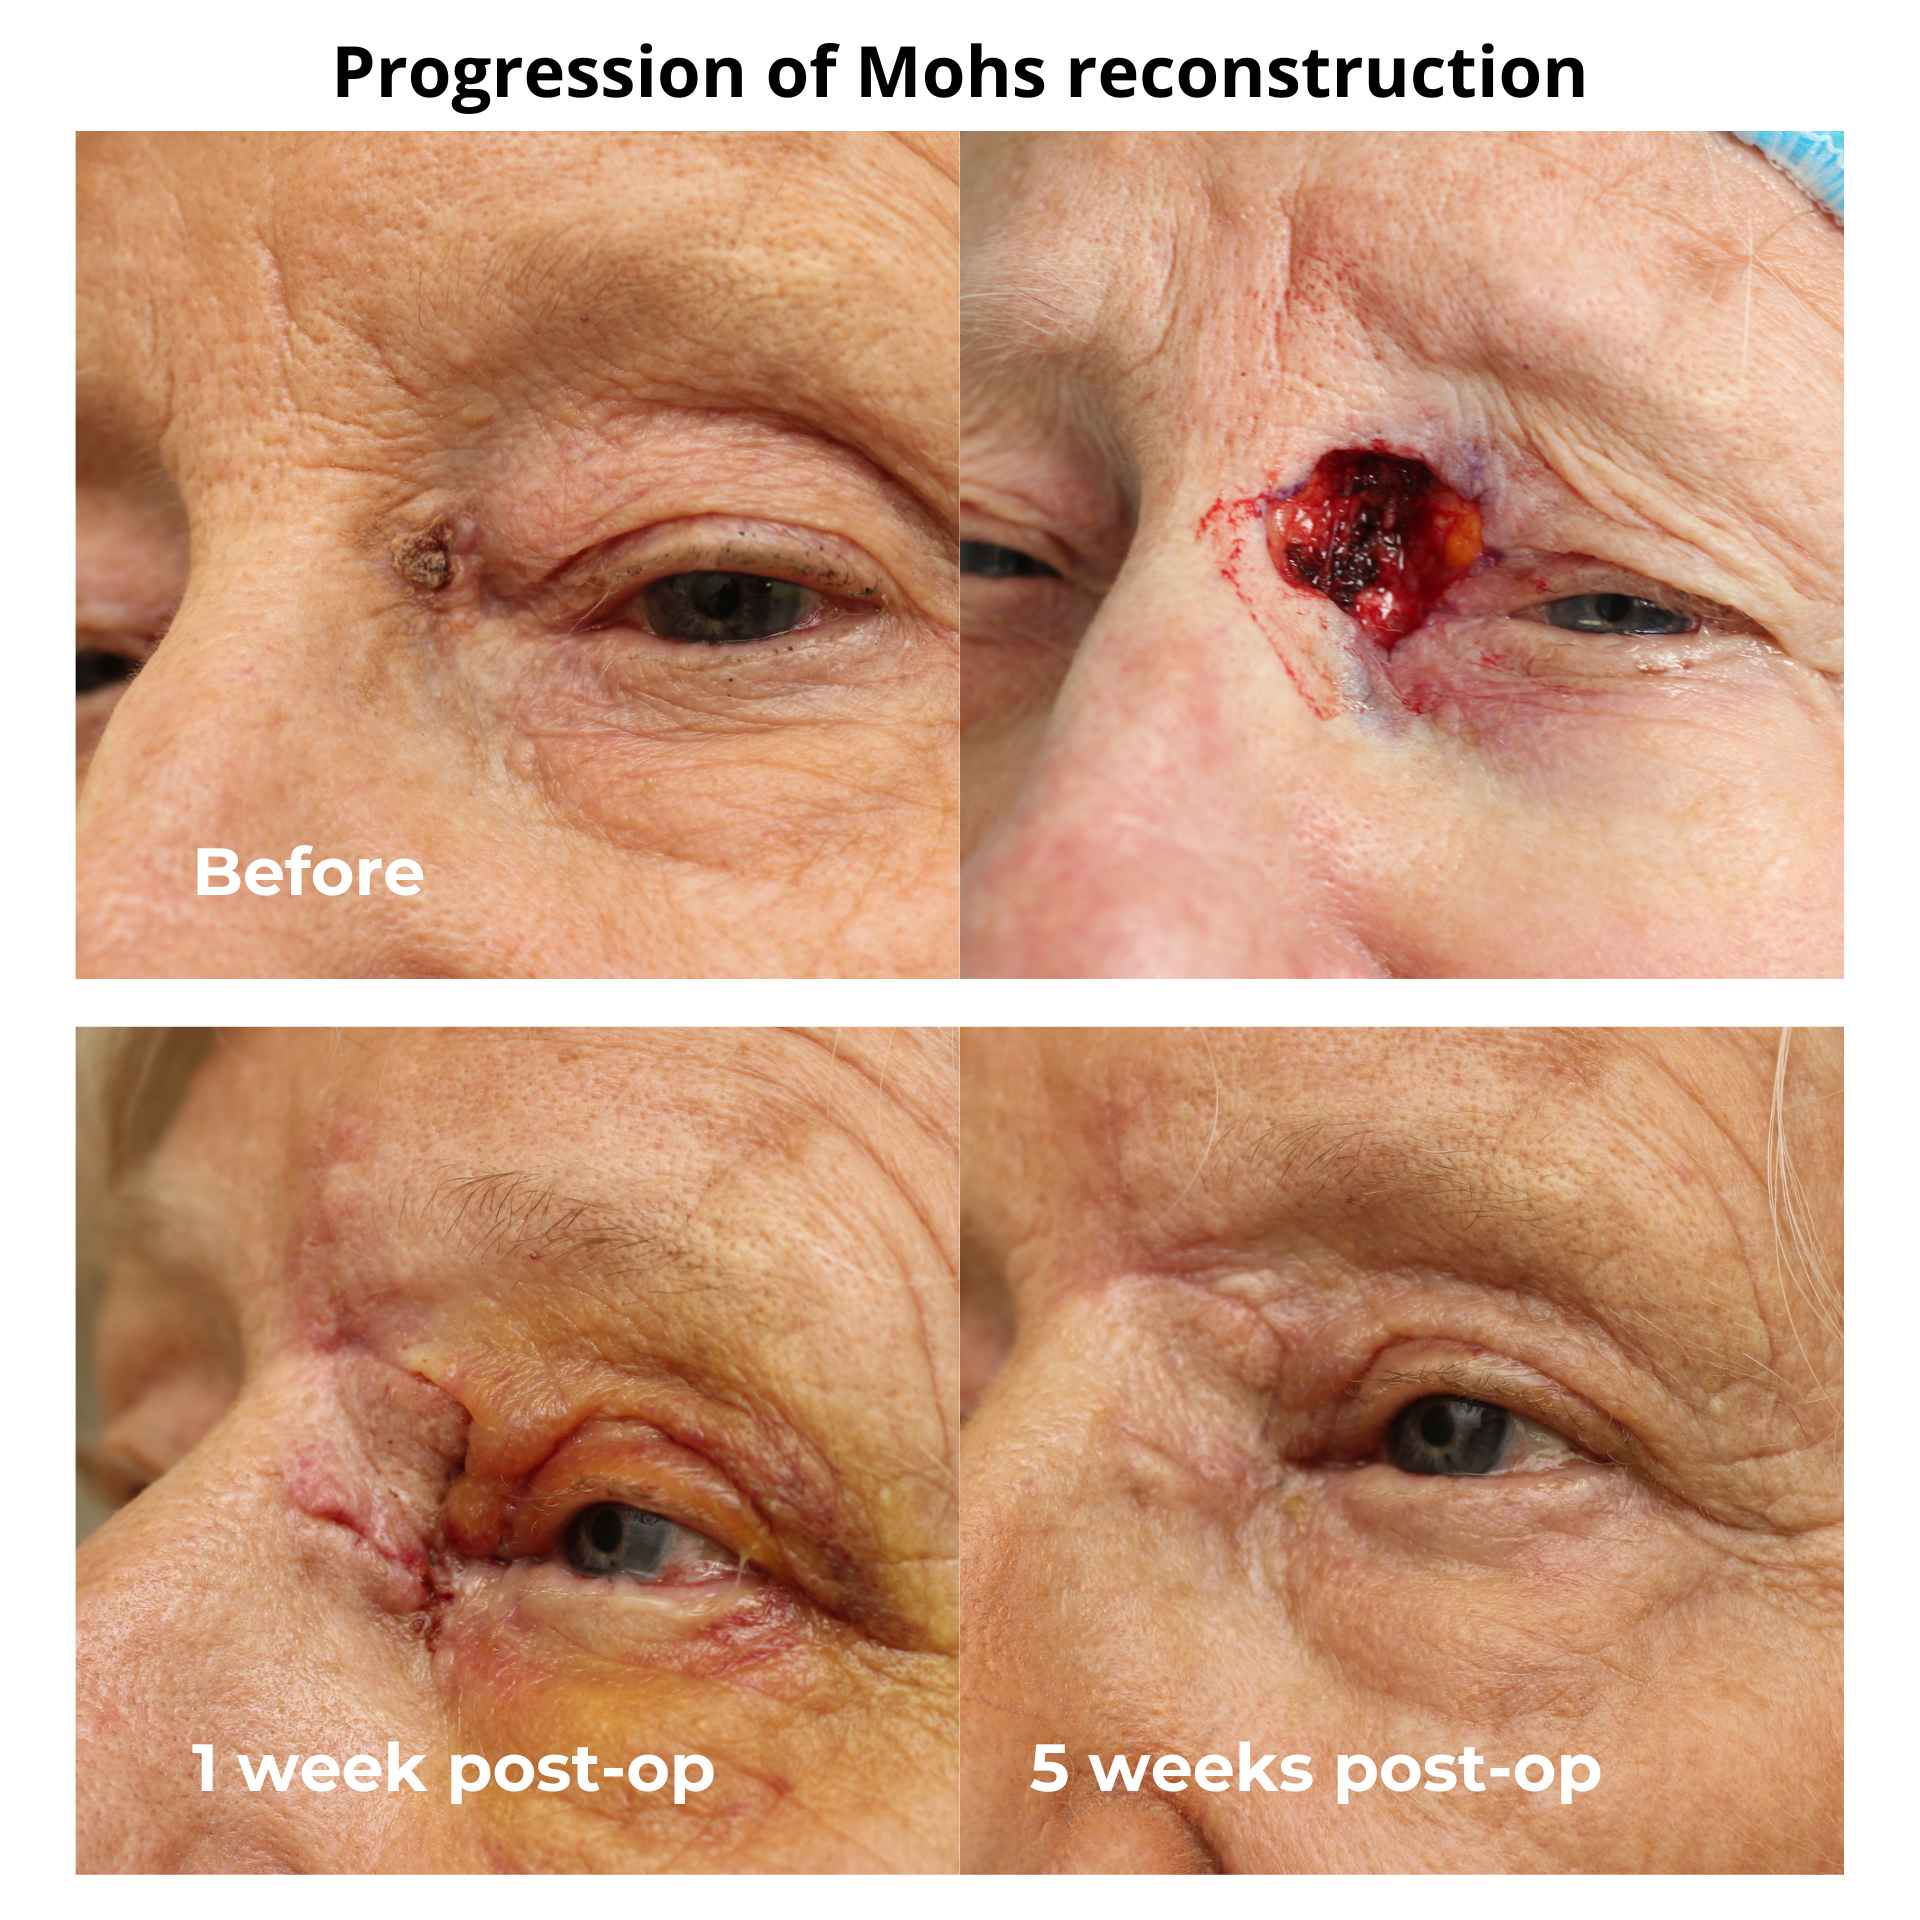 Progression of Mohs reconstruction showing the before and after phases.